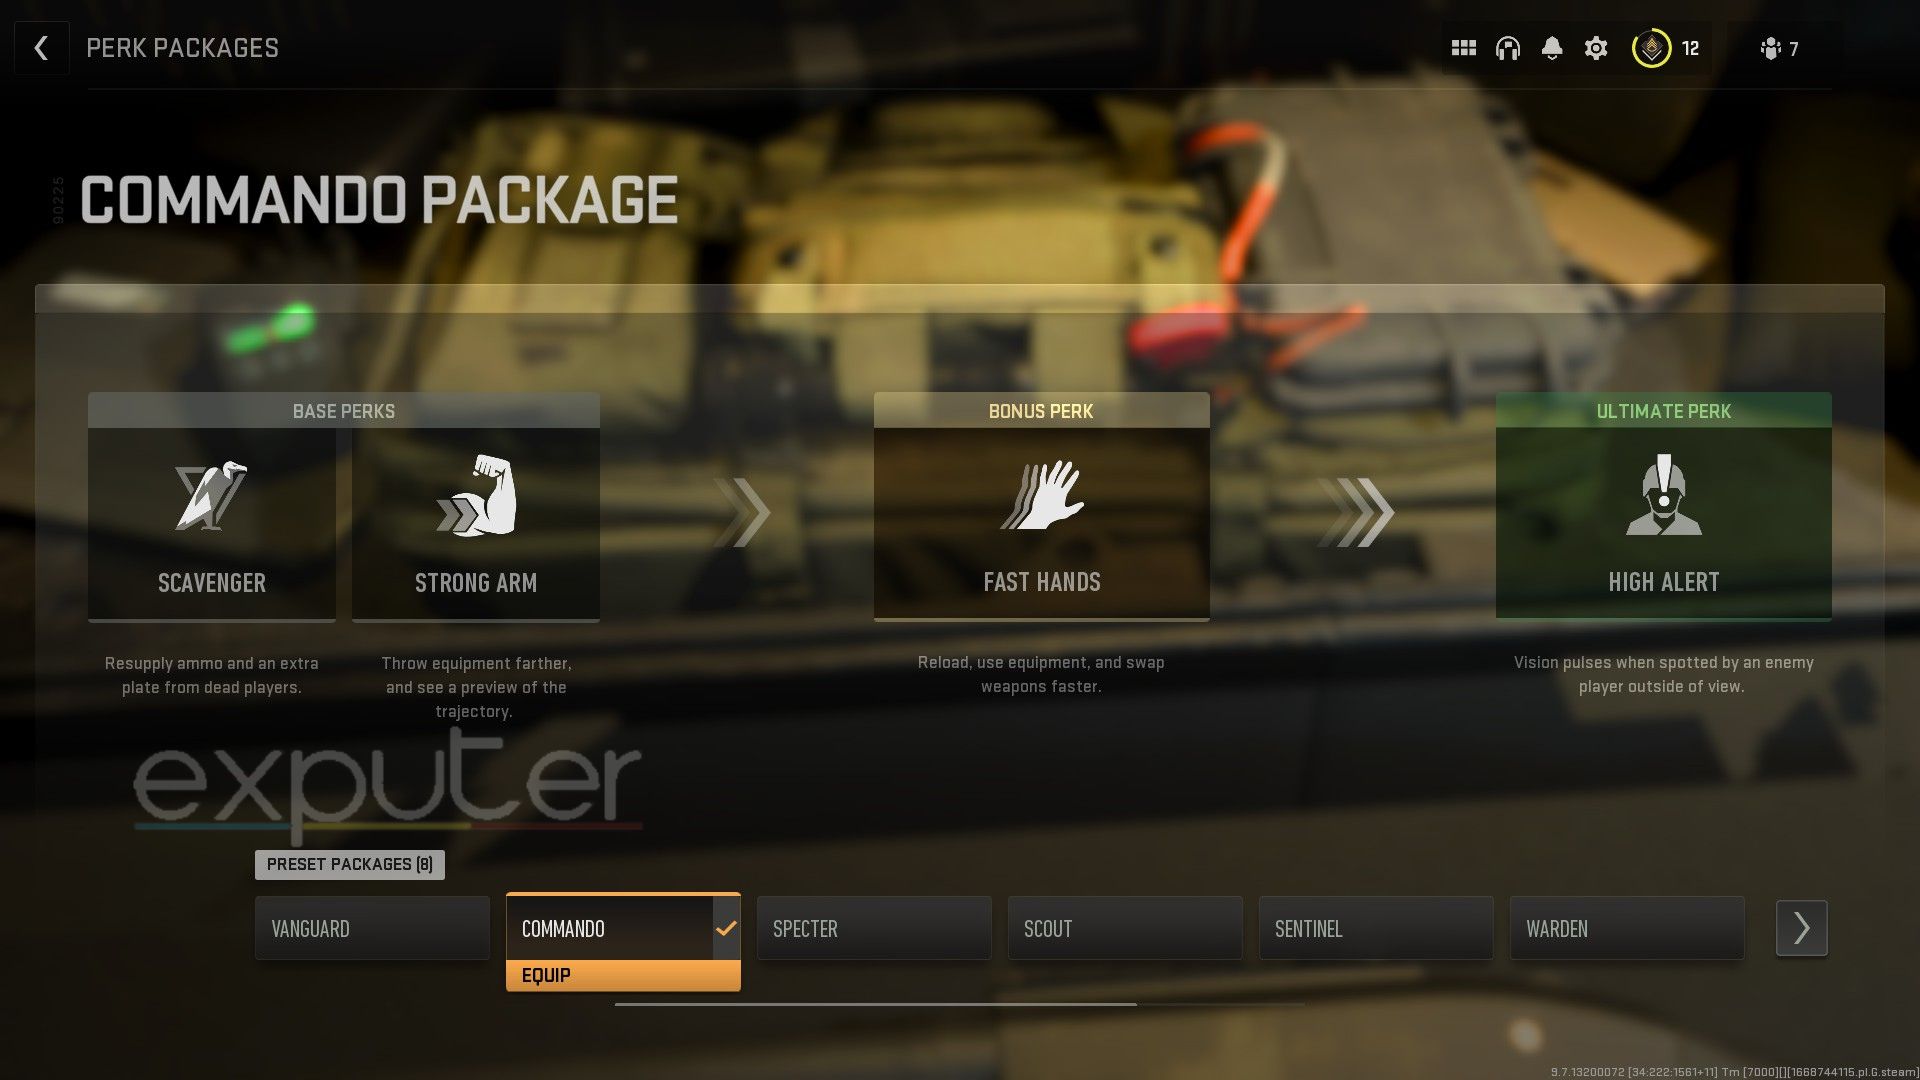 perk package for the loadout